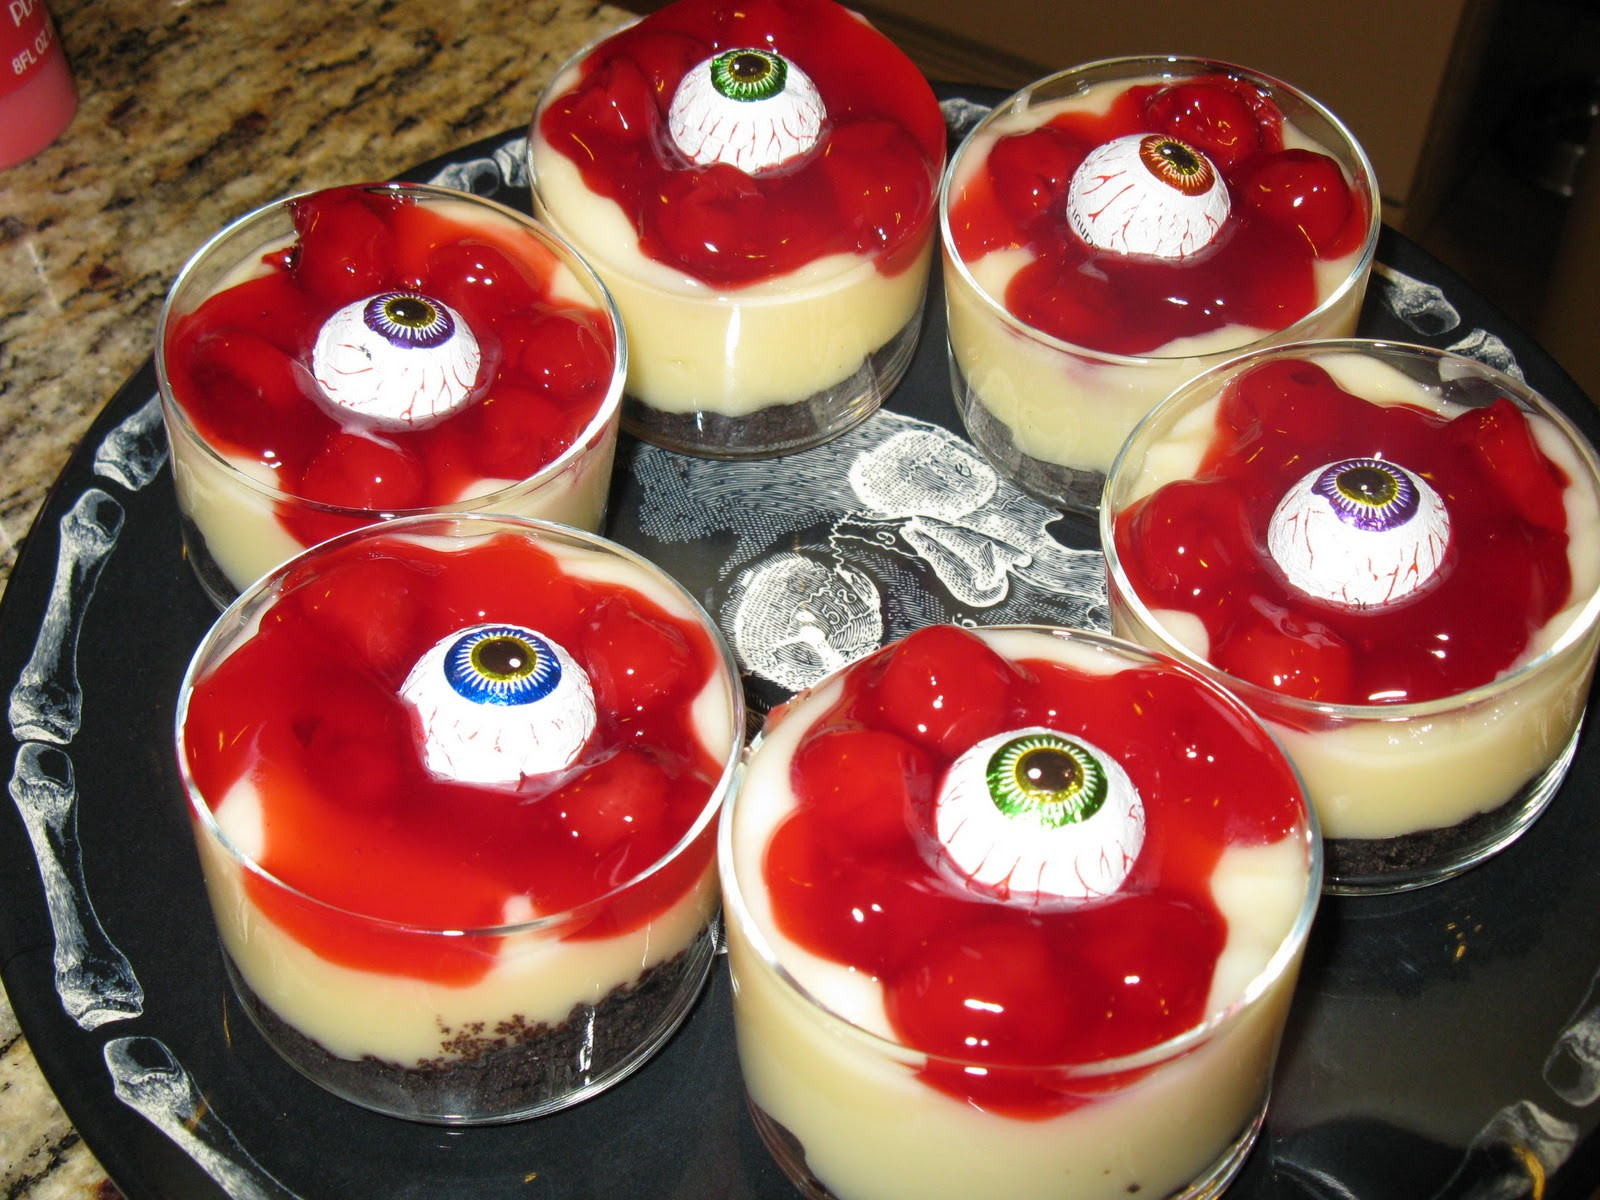 Halloween Themed Desserts
 What You Make it Day 27 of 31 Spooktacular Blood and